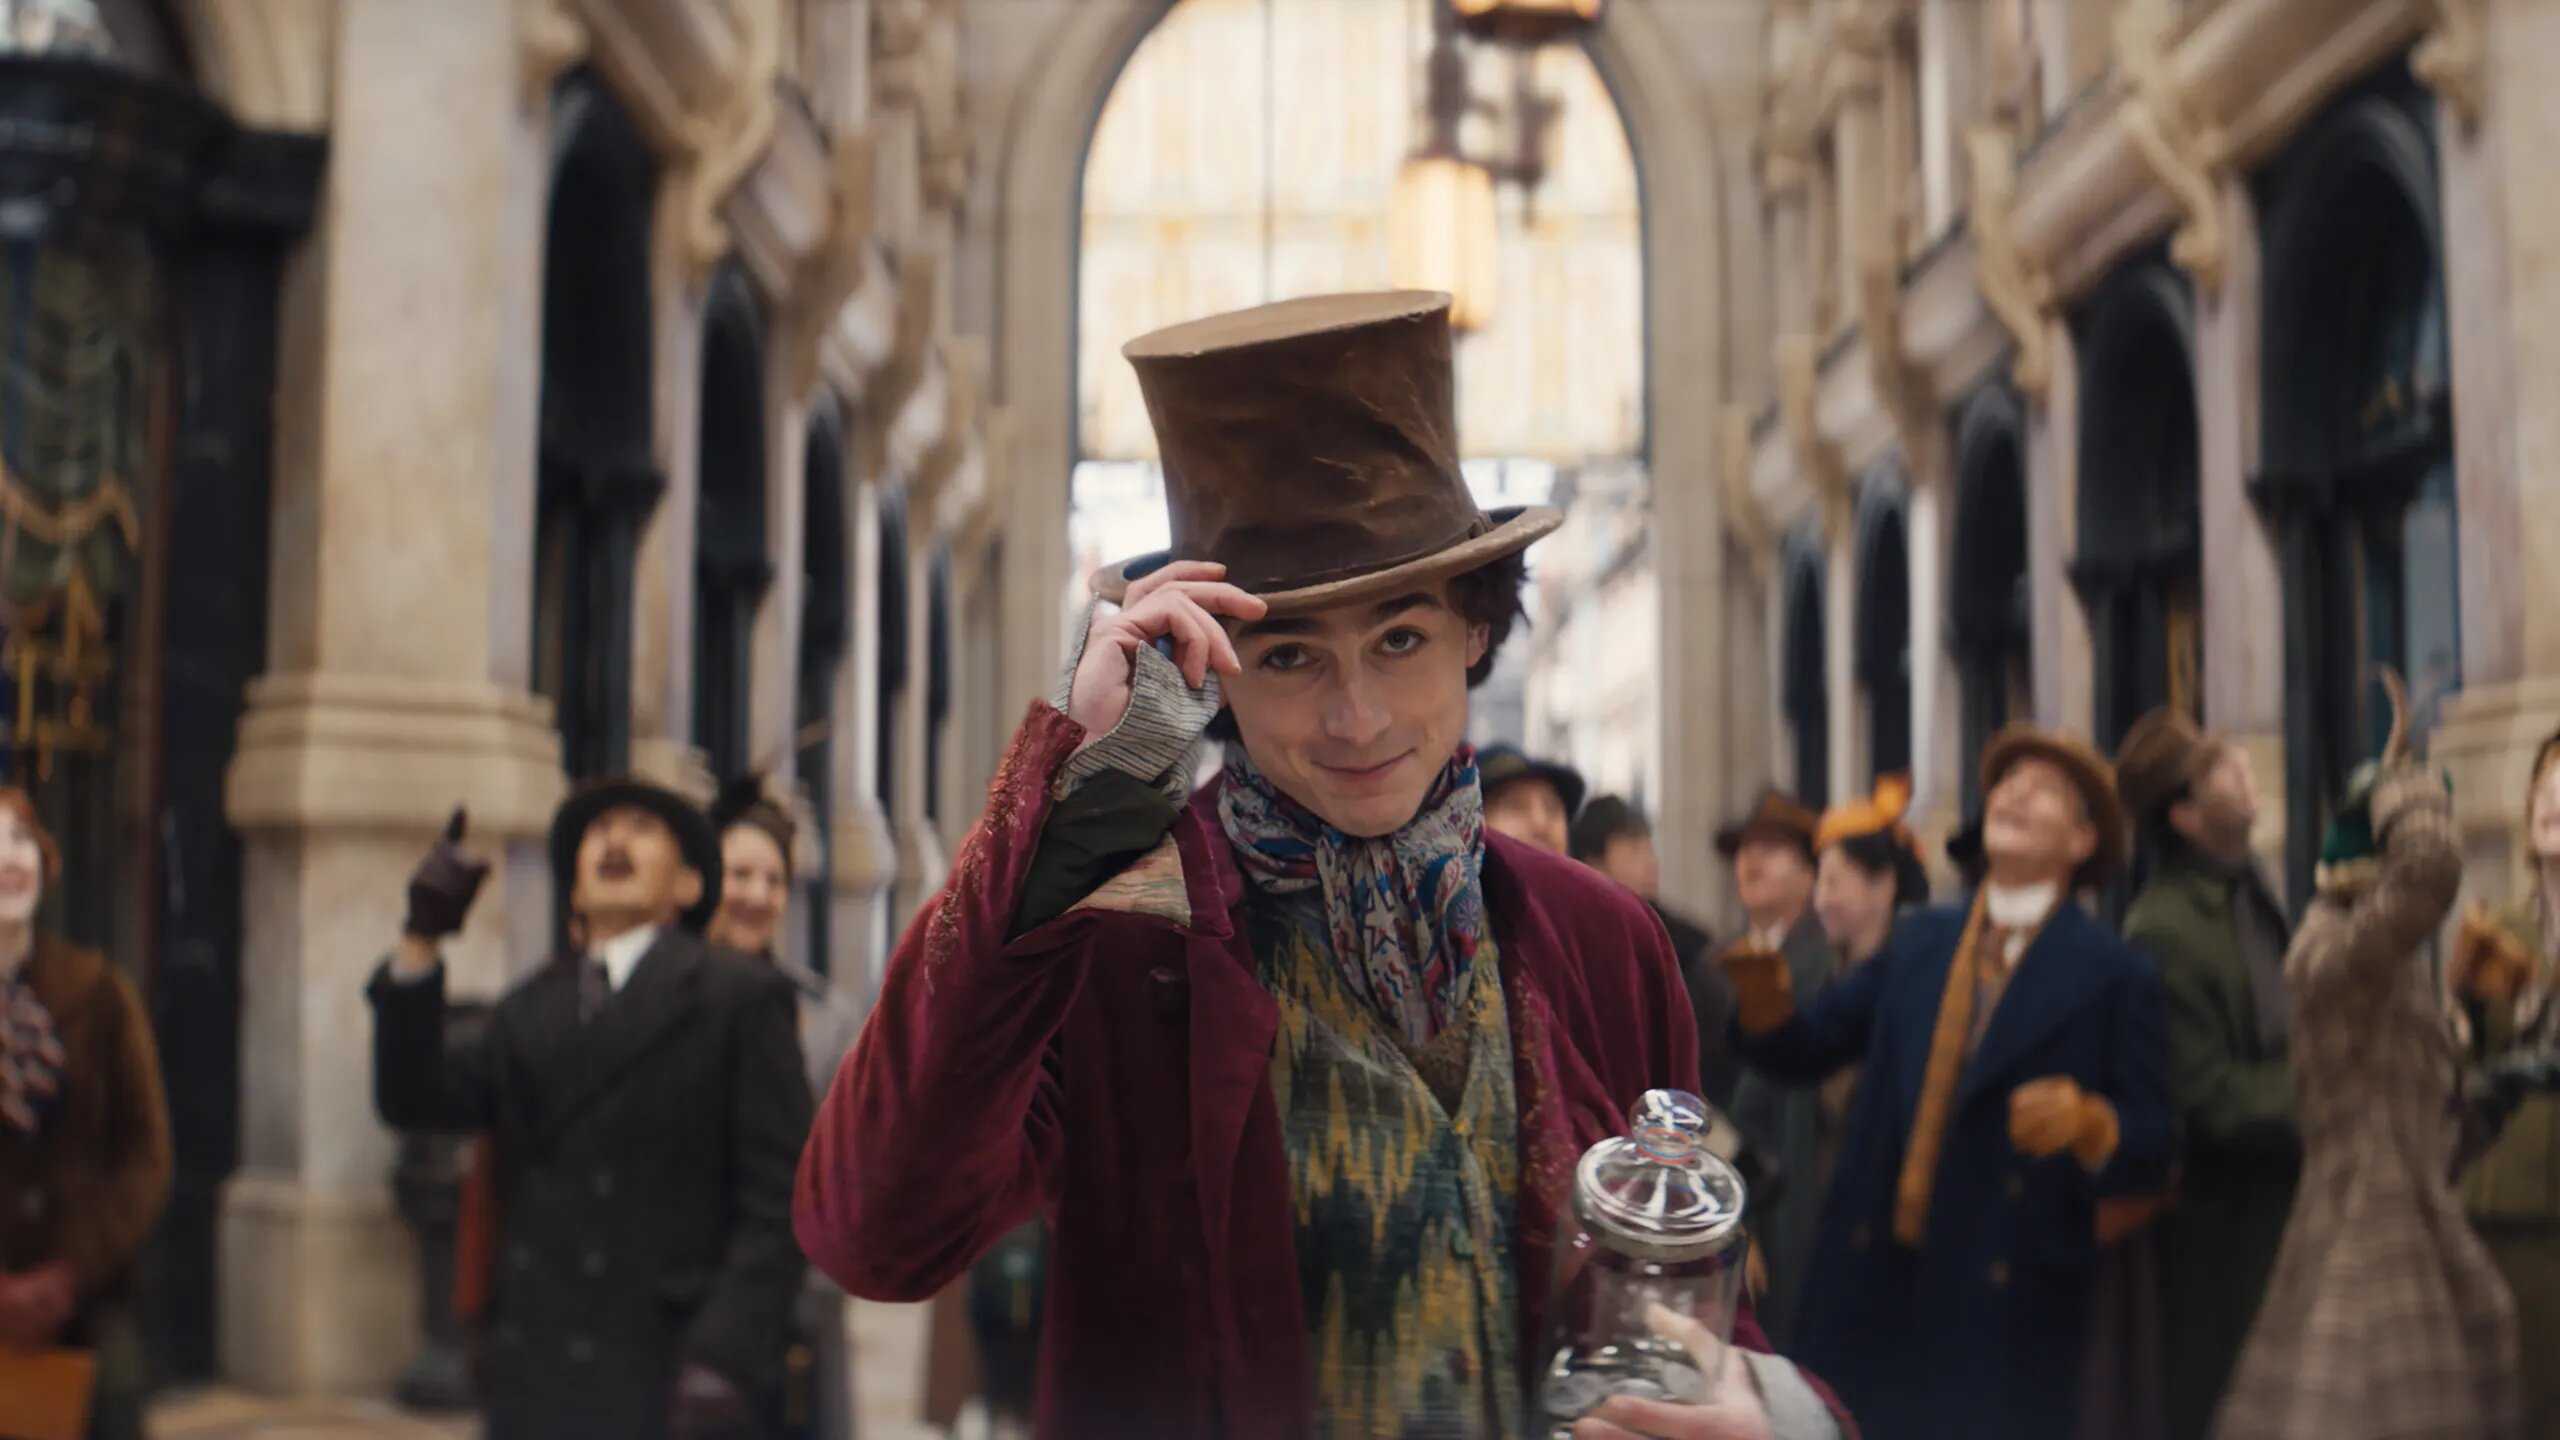 Revisit Timothée Chalamet’s first look as iconic candy man in Wonka prequel